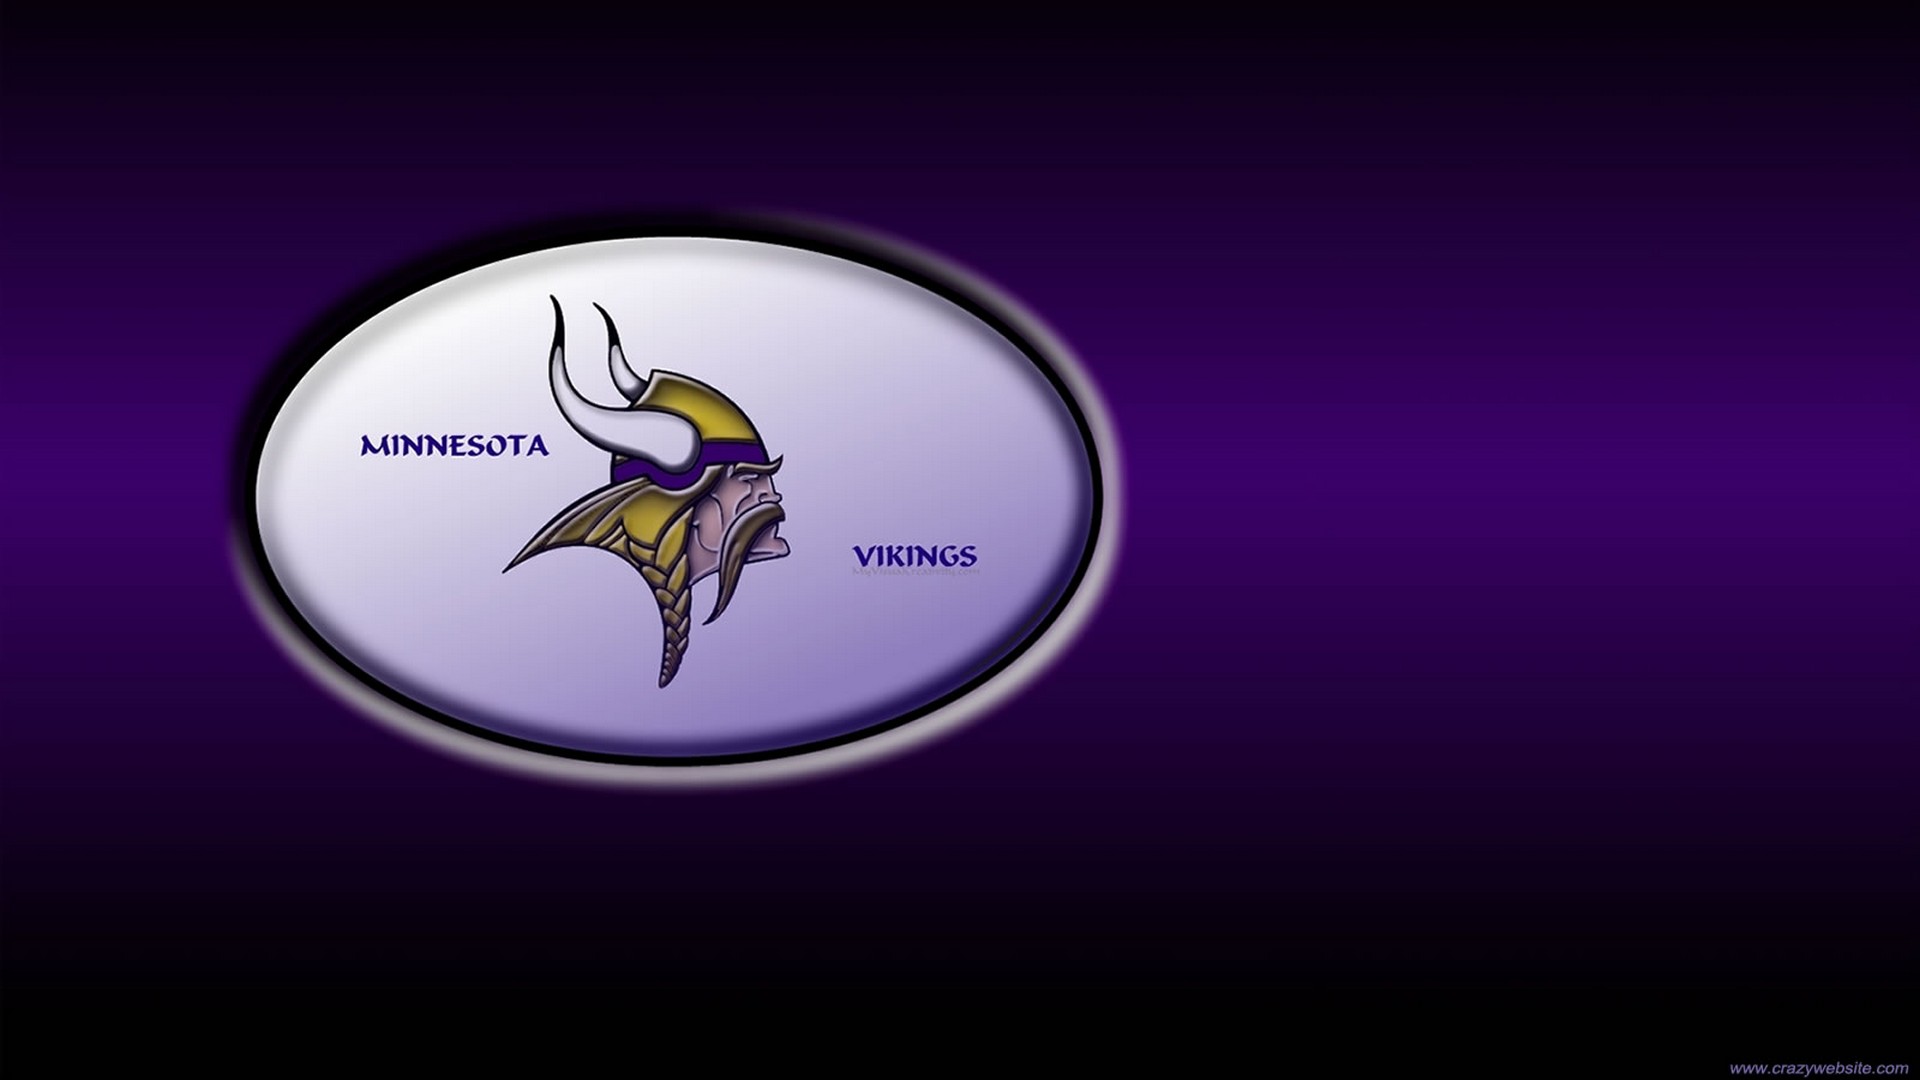 Minnesota Vikings Desktop Wallpapers With Resolution 1920X1080 pixel. You can make this wallpaper for your Mac or Windows Desktop Background, iPhone, Android or Tablet and another Smartphone device for free